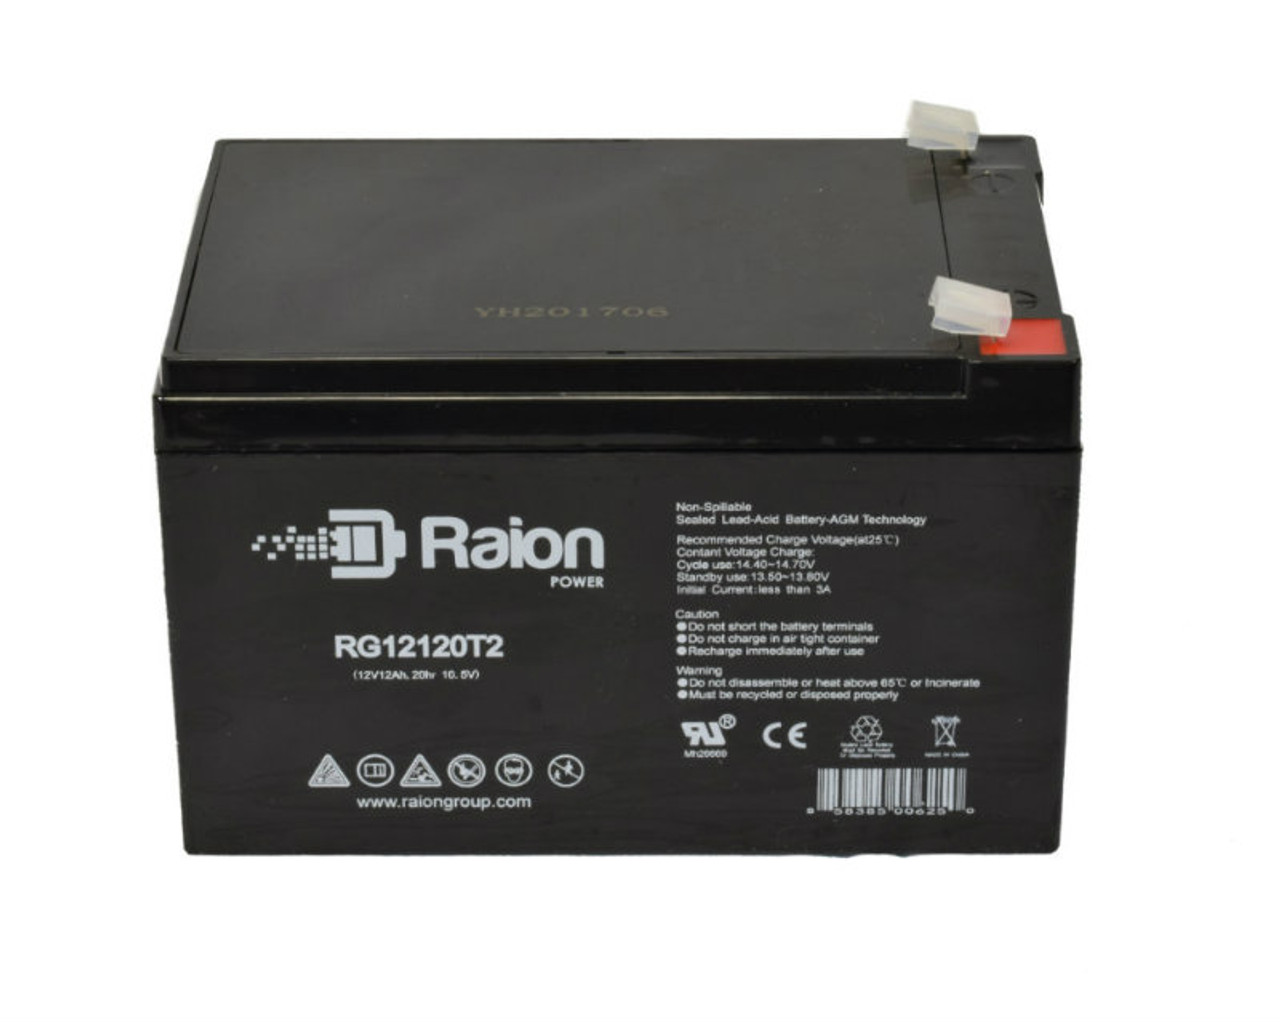 Raion Power RG12120T2 SLA Battery for Drive Medical Design Spitfire Scout 4-DXL Scooter Wheelchairs